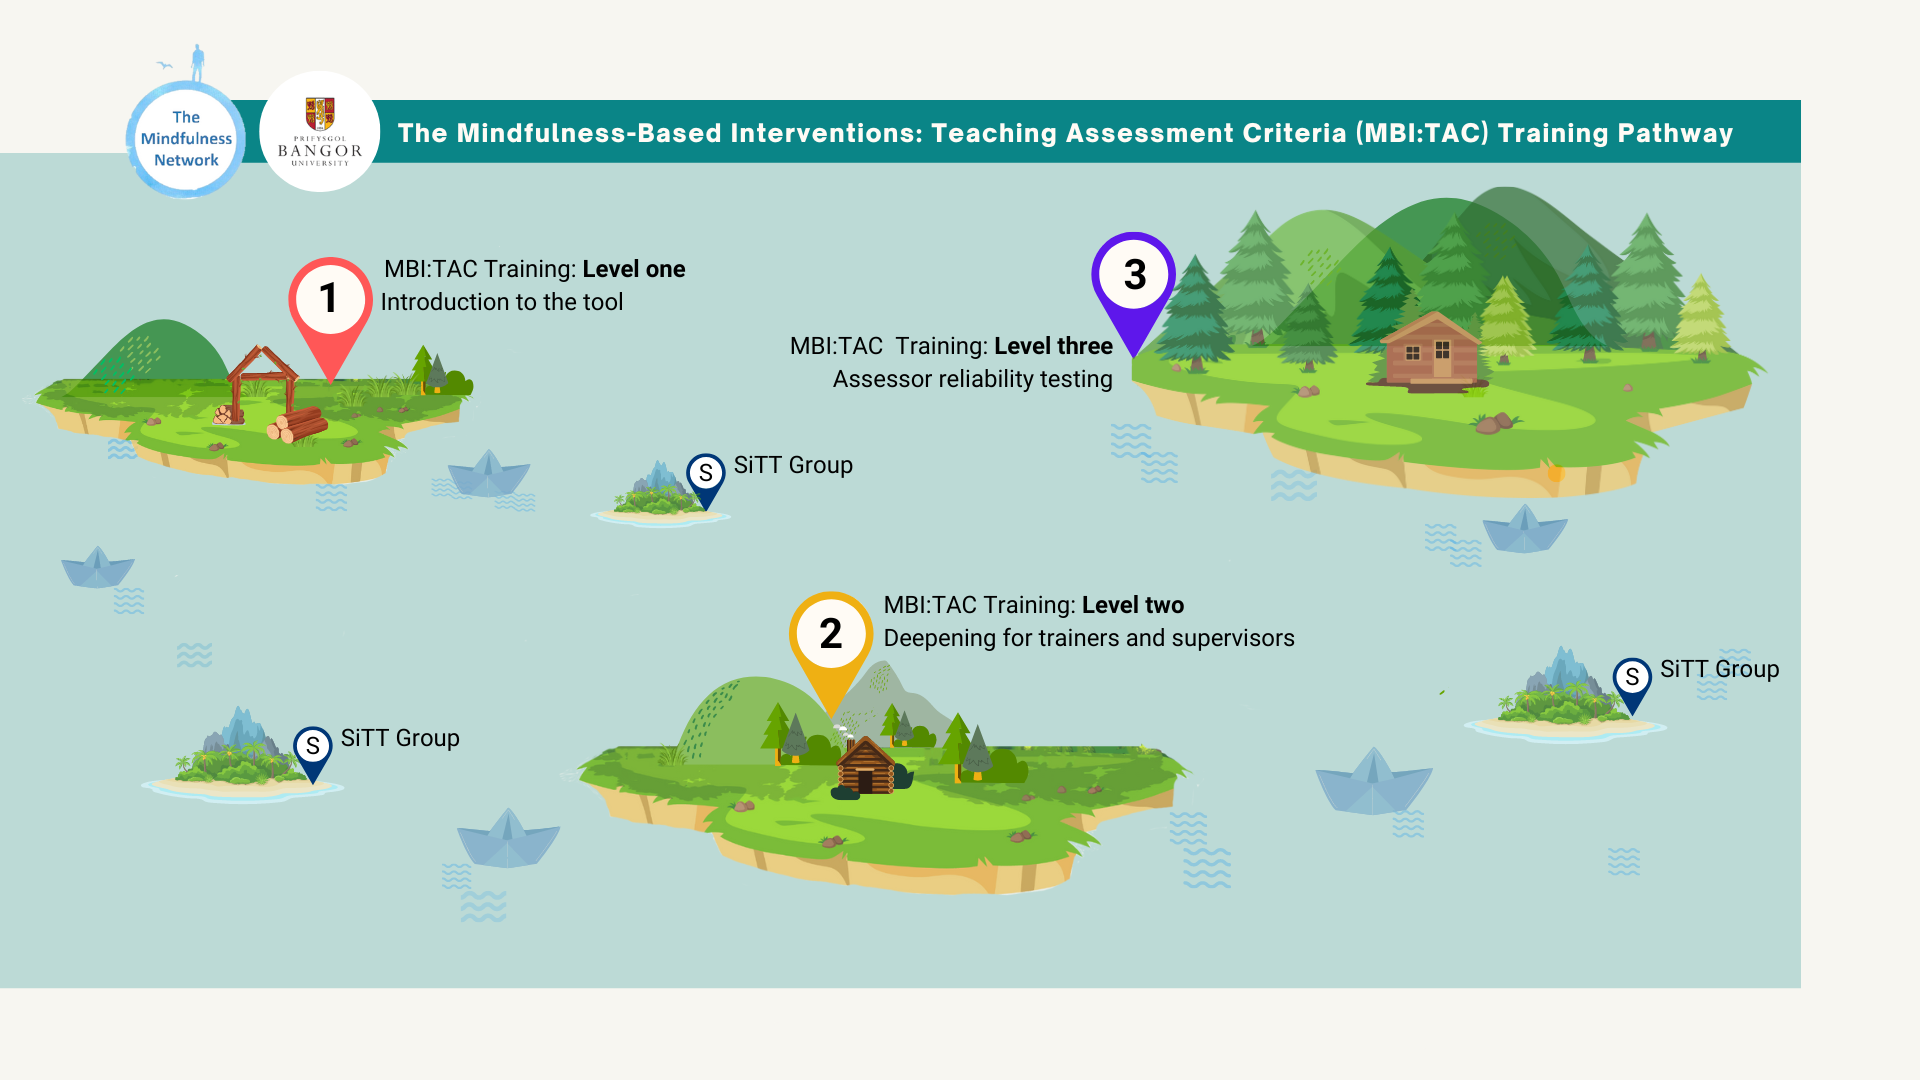 A decorative infographic shows the 3 levels of MBI:TAC training represented as green islands floating on the ocean